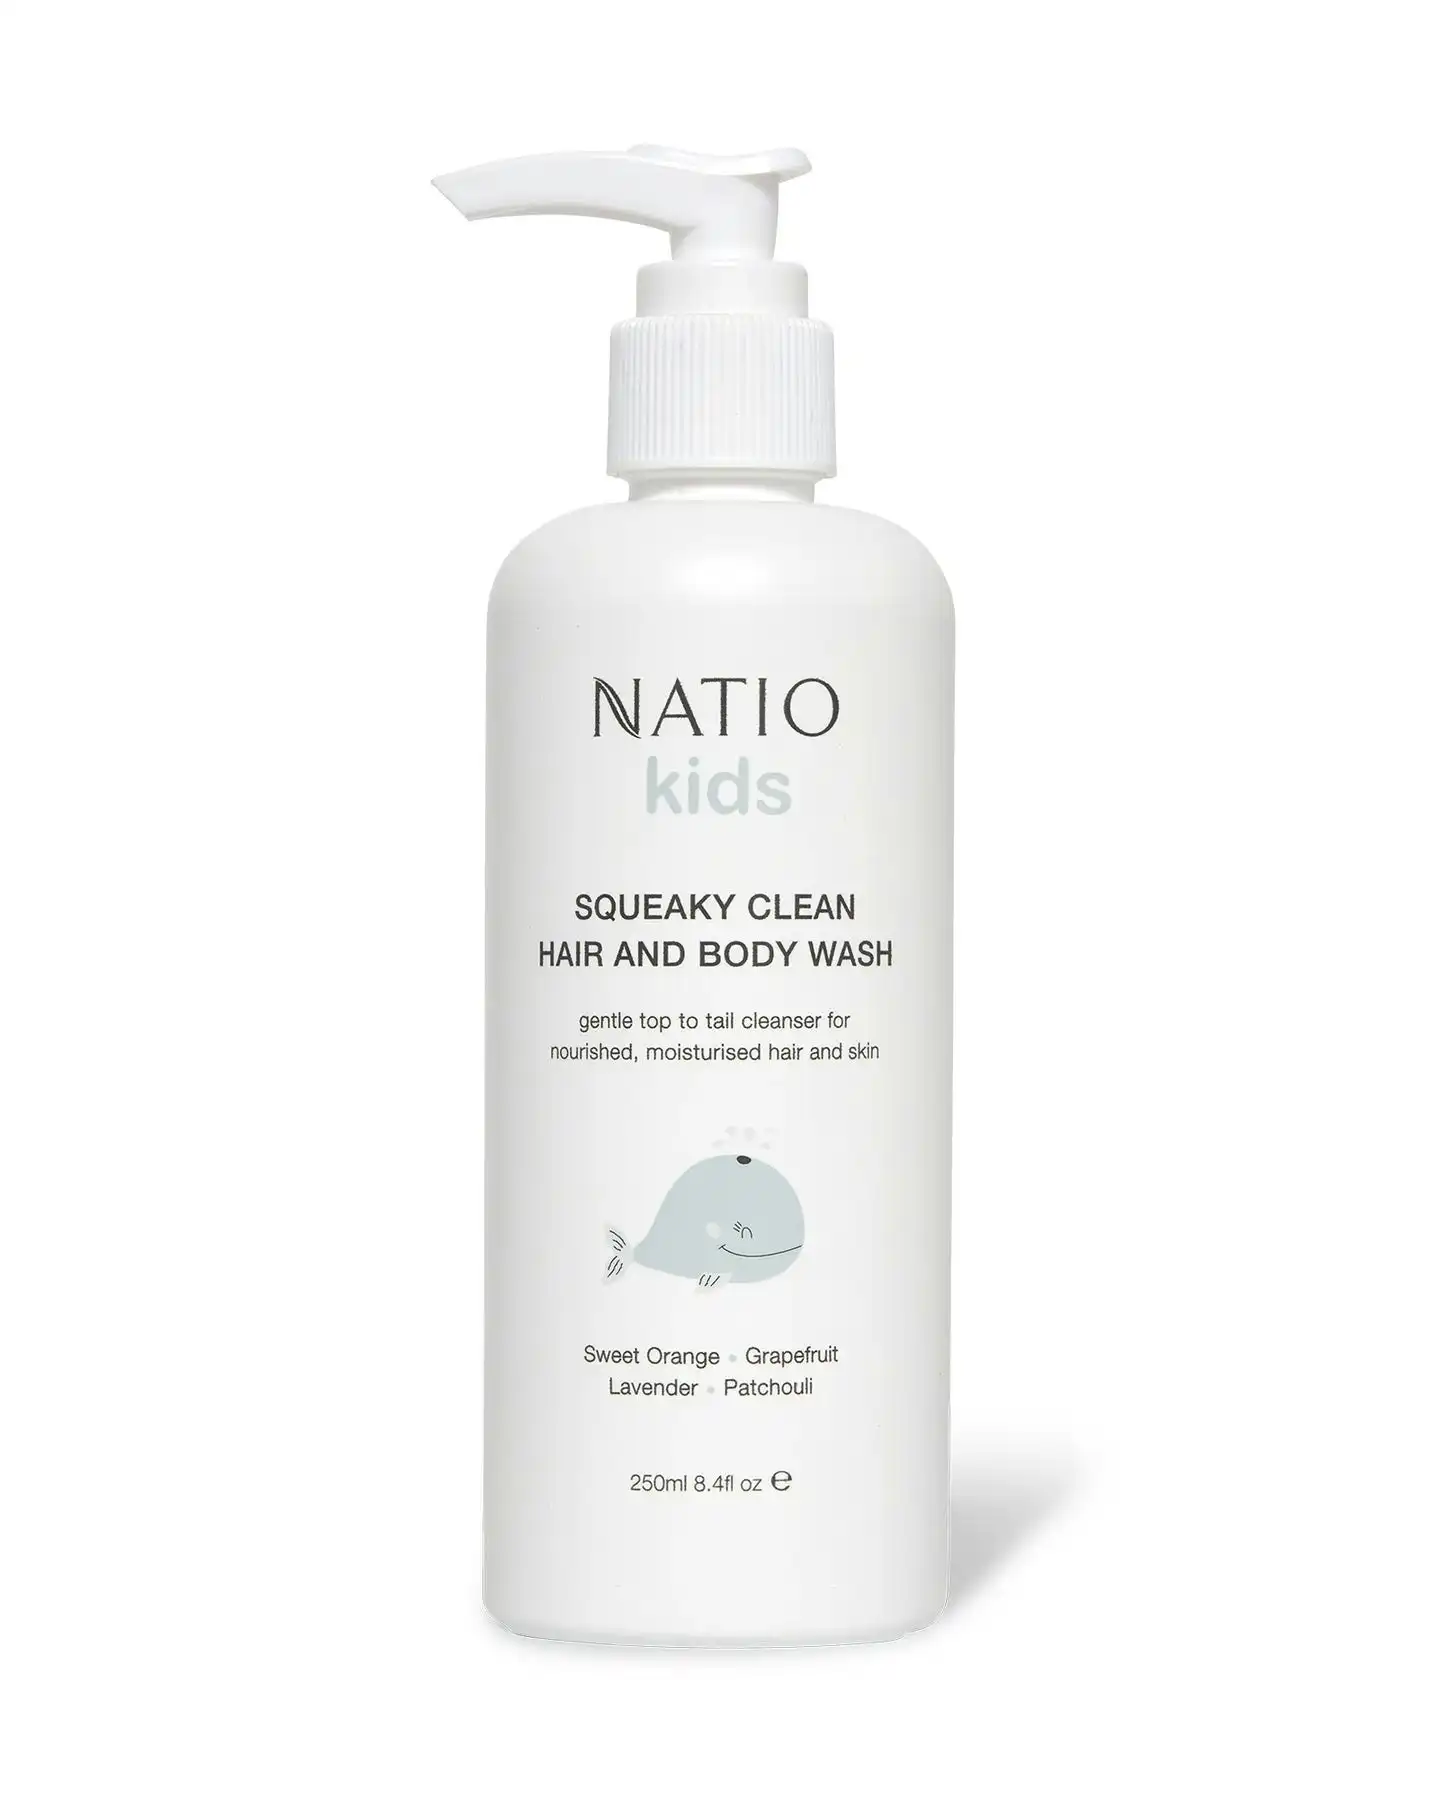 Natio Squeaky Clean Hair And Body Wash